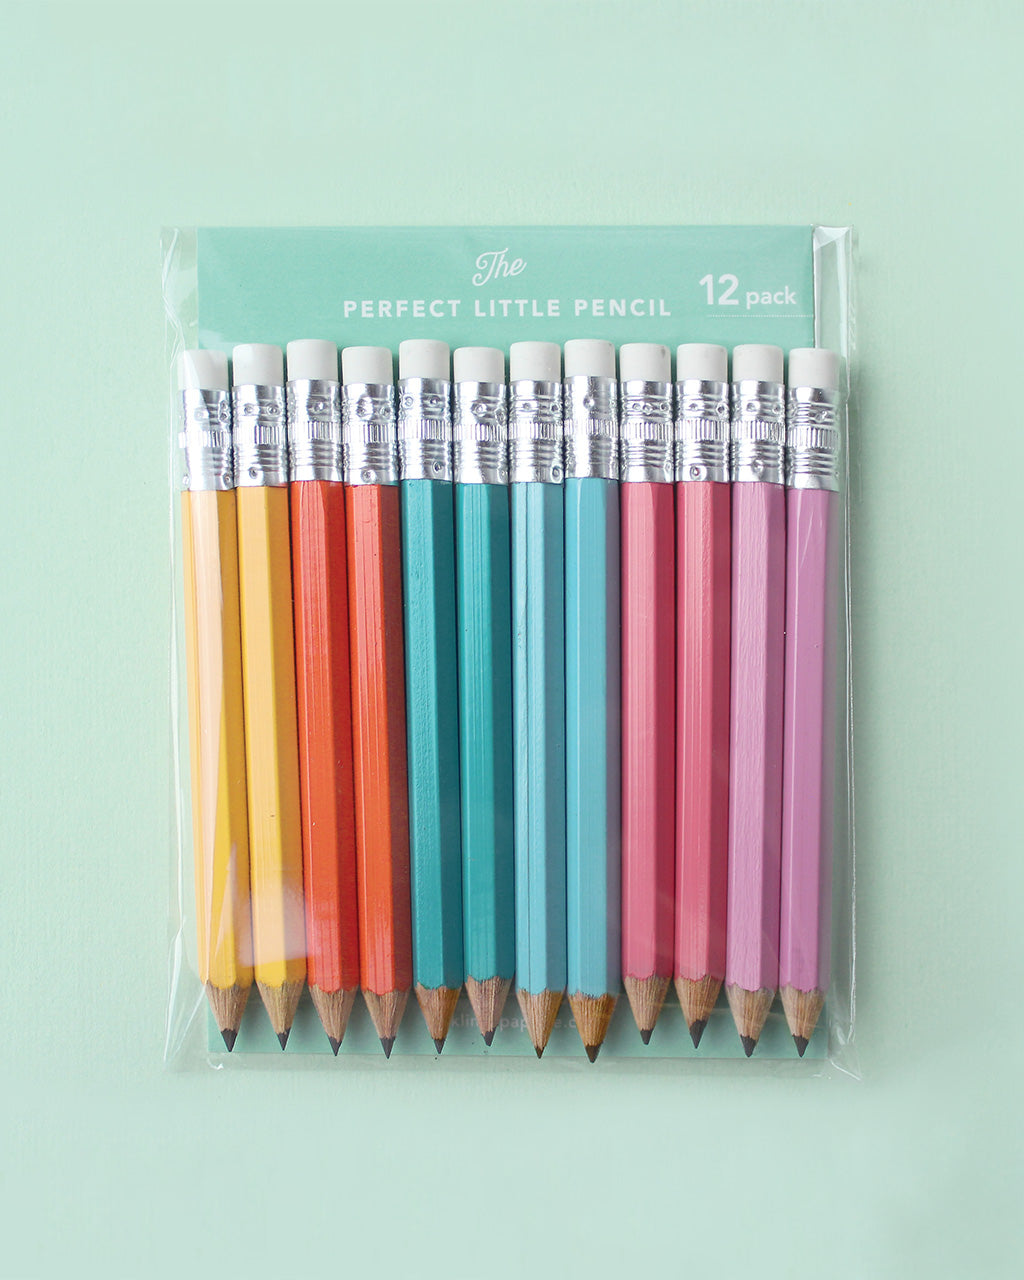 Mini Colored Pencil Set With Case , Eraser and Sharpener — Two Hands Paperie